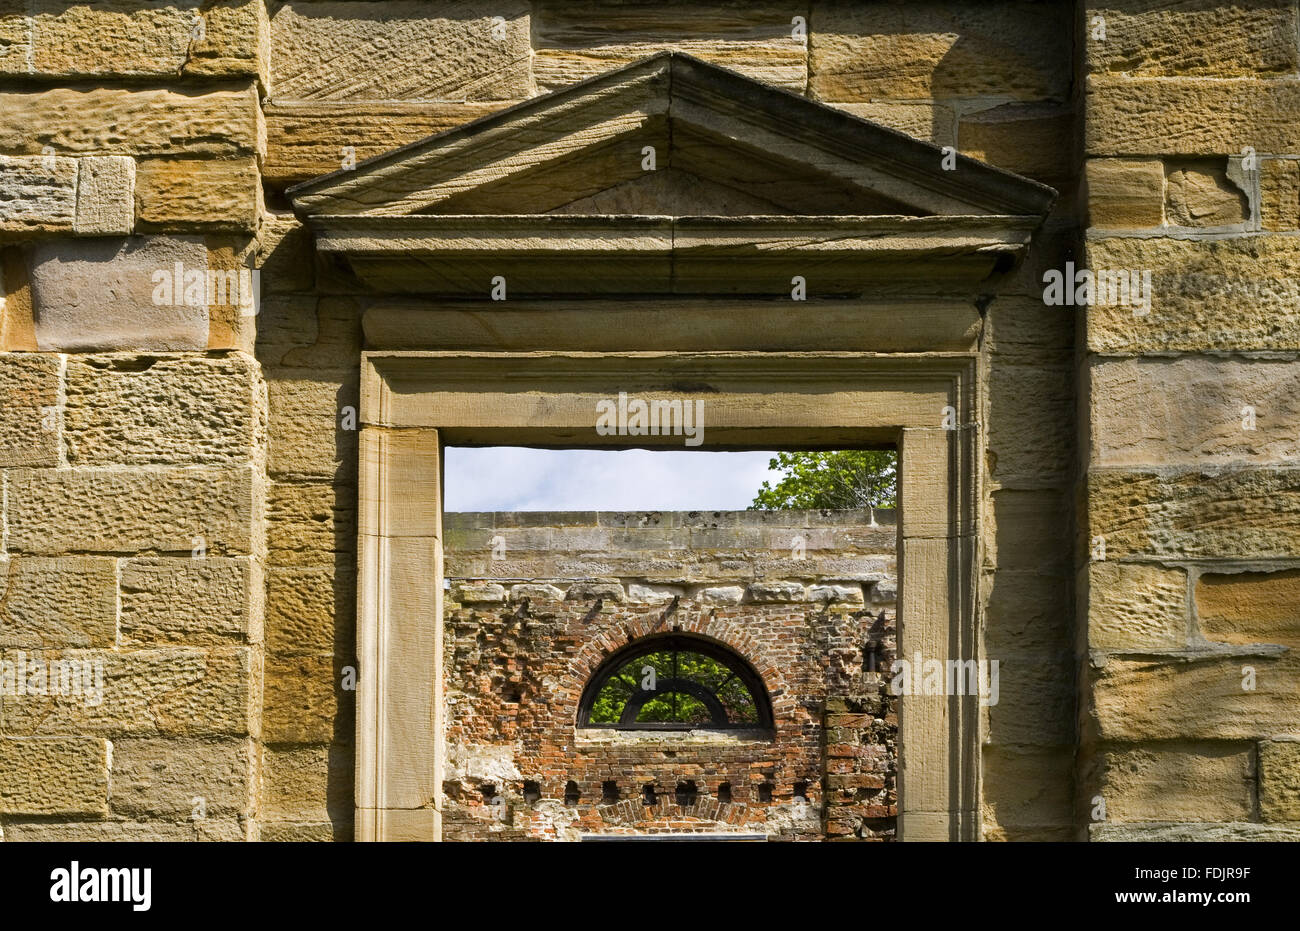 Pediment detail of the Orangery, which was begun in 1772 to a design attributed to James Paine, at Gibside, Newcastle upon Tyne. George Bowes inherited the estate in 1722 and landscaped the grounds and created buildings around Gibside Hall. Stock Photo